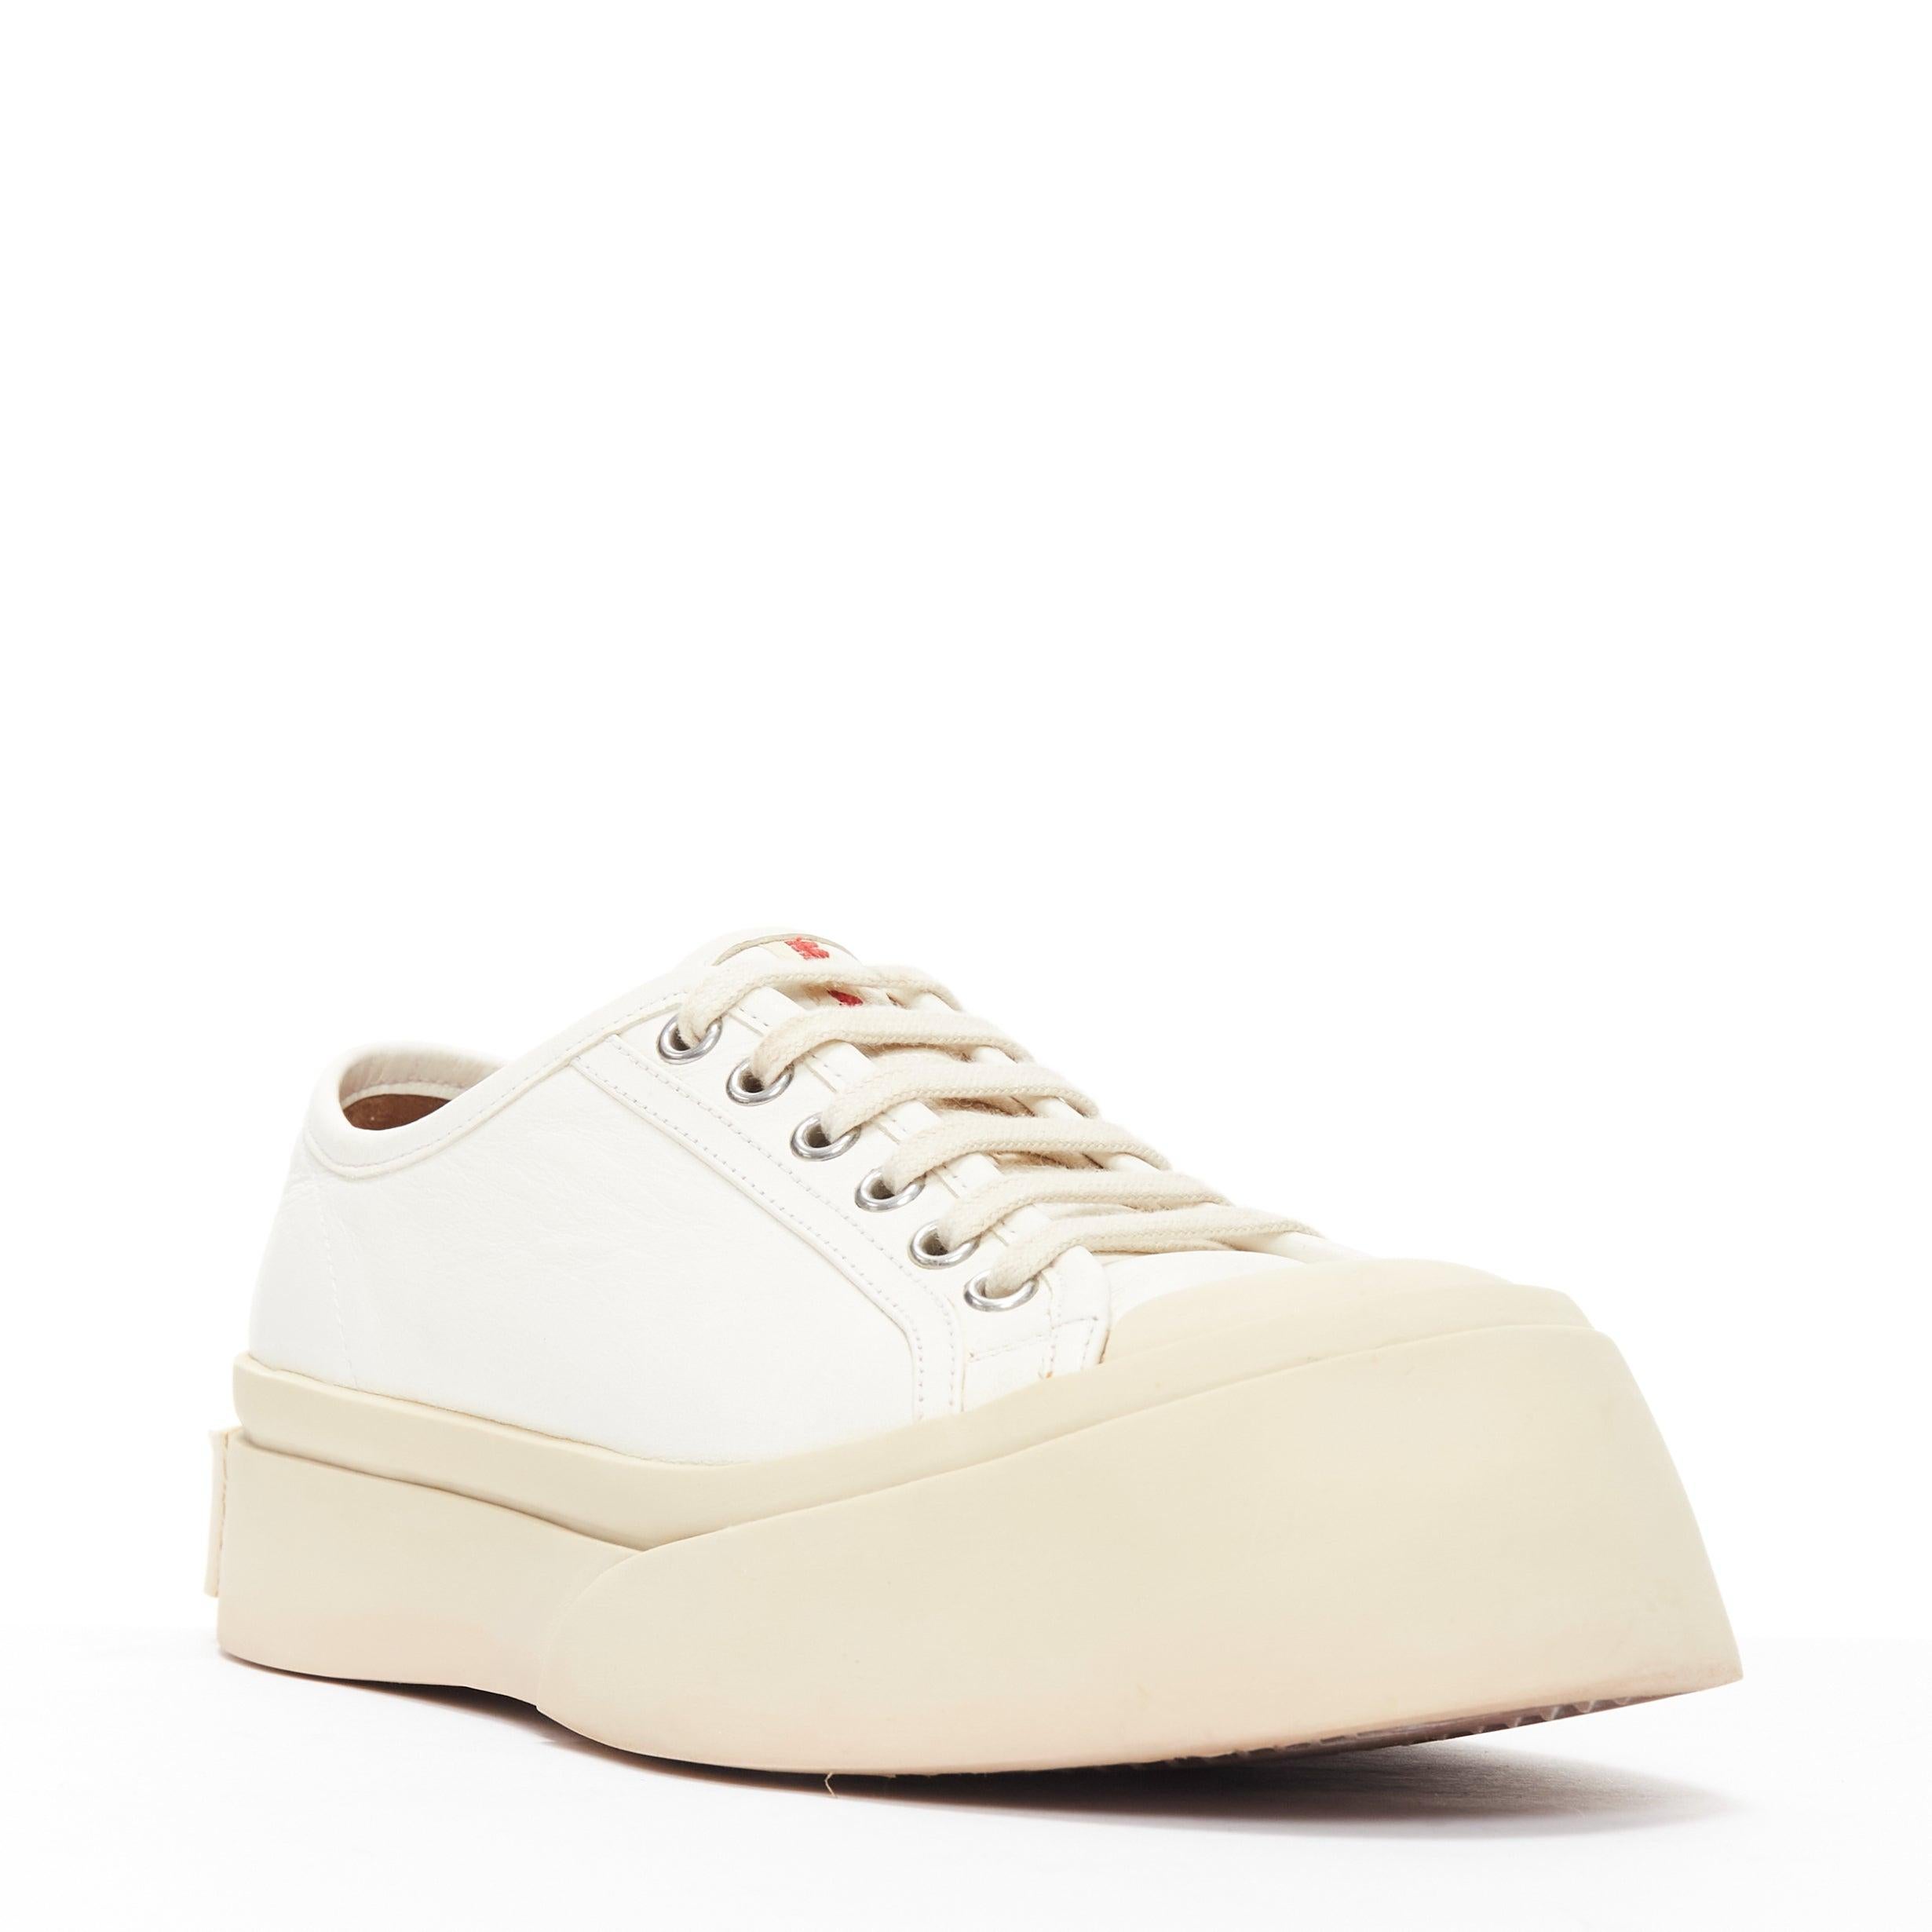 MARNI Pablo white leather chunky wide toe lace up low top sneakers EU36
Reference: JACG/A00153
Brand: Marni
Model: Pablo
Material: Leather, Rubber
Color: White, Cream
Pattern: Solid
Closure: Lace Up
Lining: Brown Leather
Extra Details: Marni's